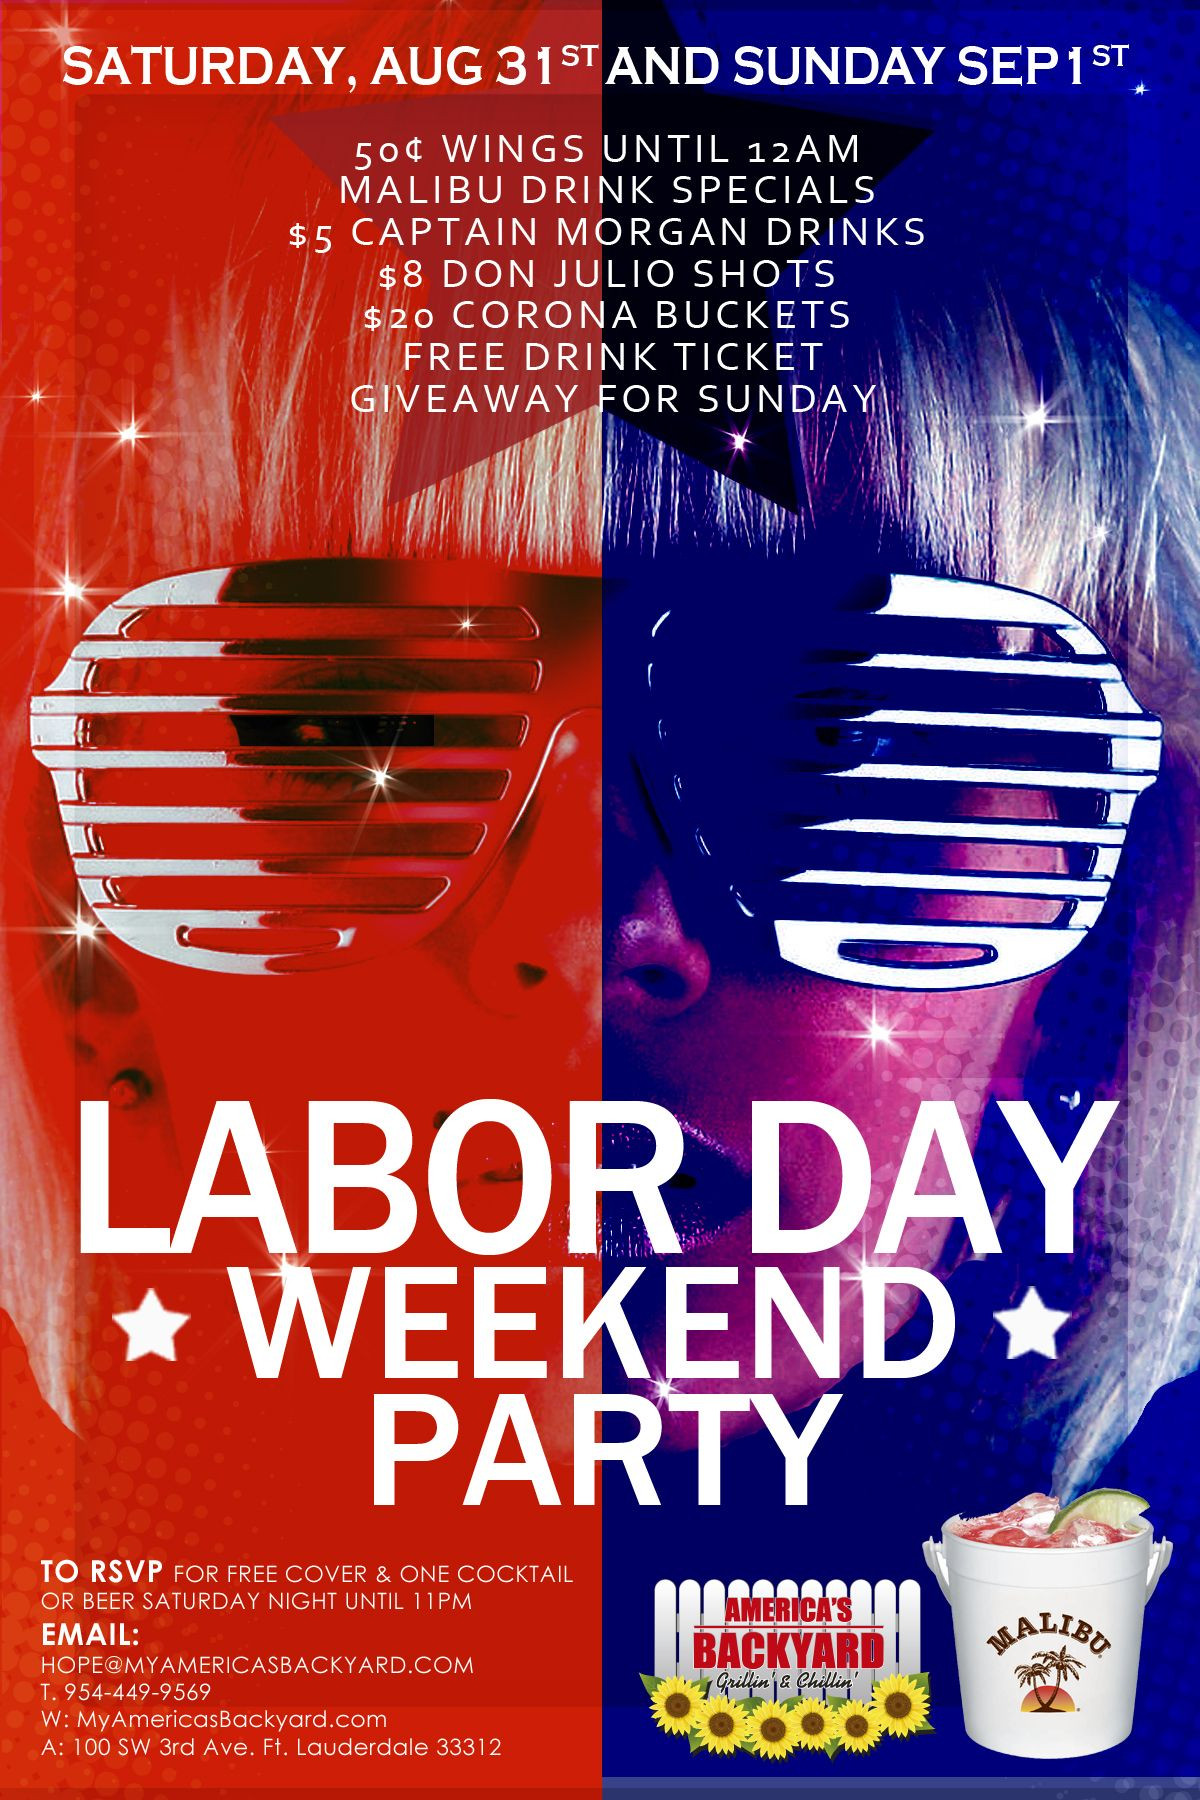 Labor Day Food Deals
 Labor Day Party at America s Backyard Saturday Aug 31st